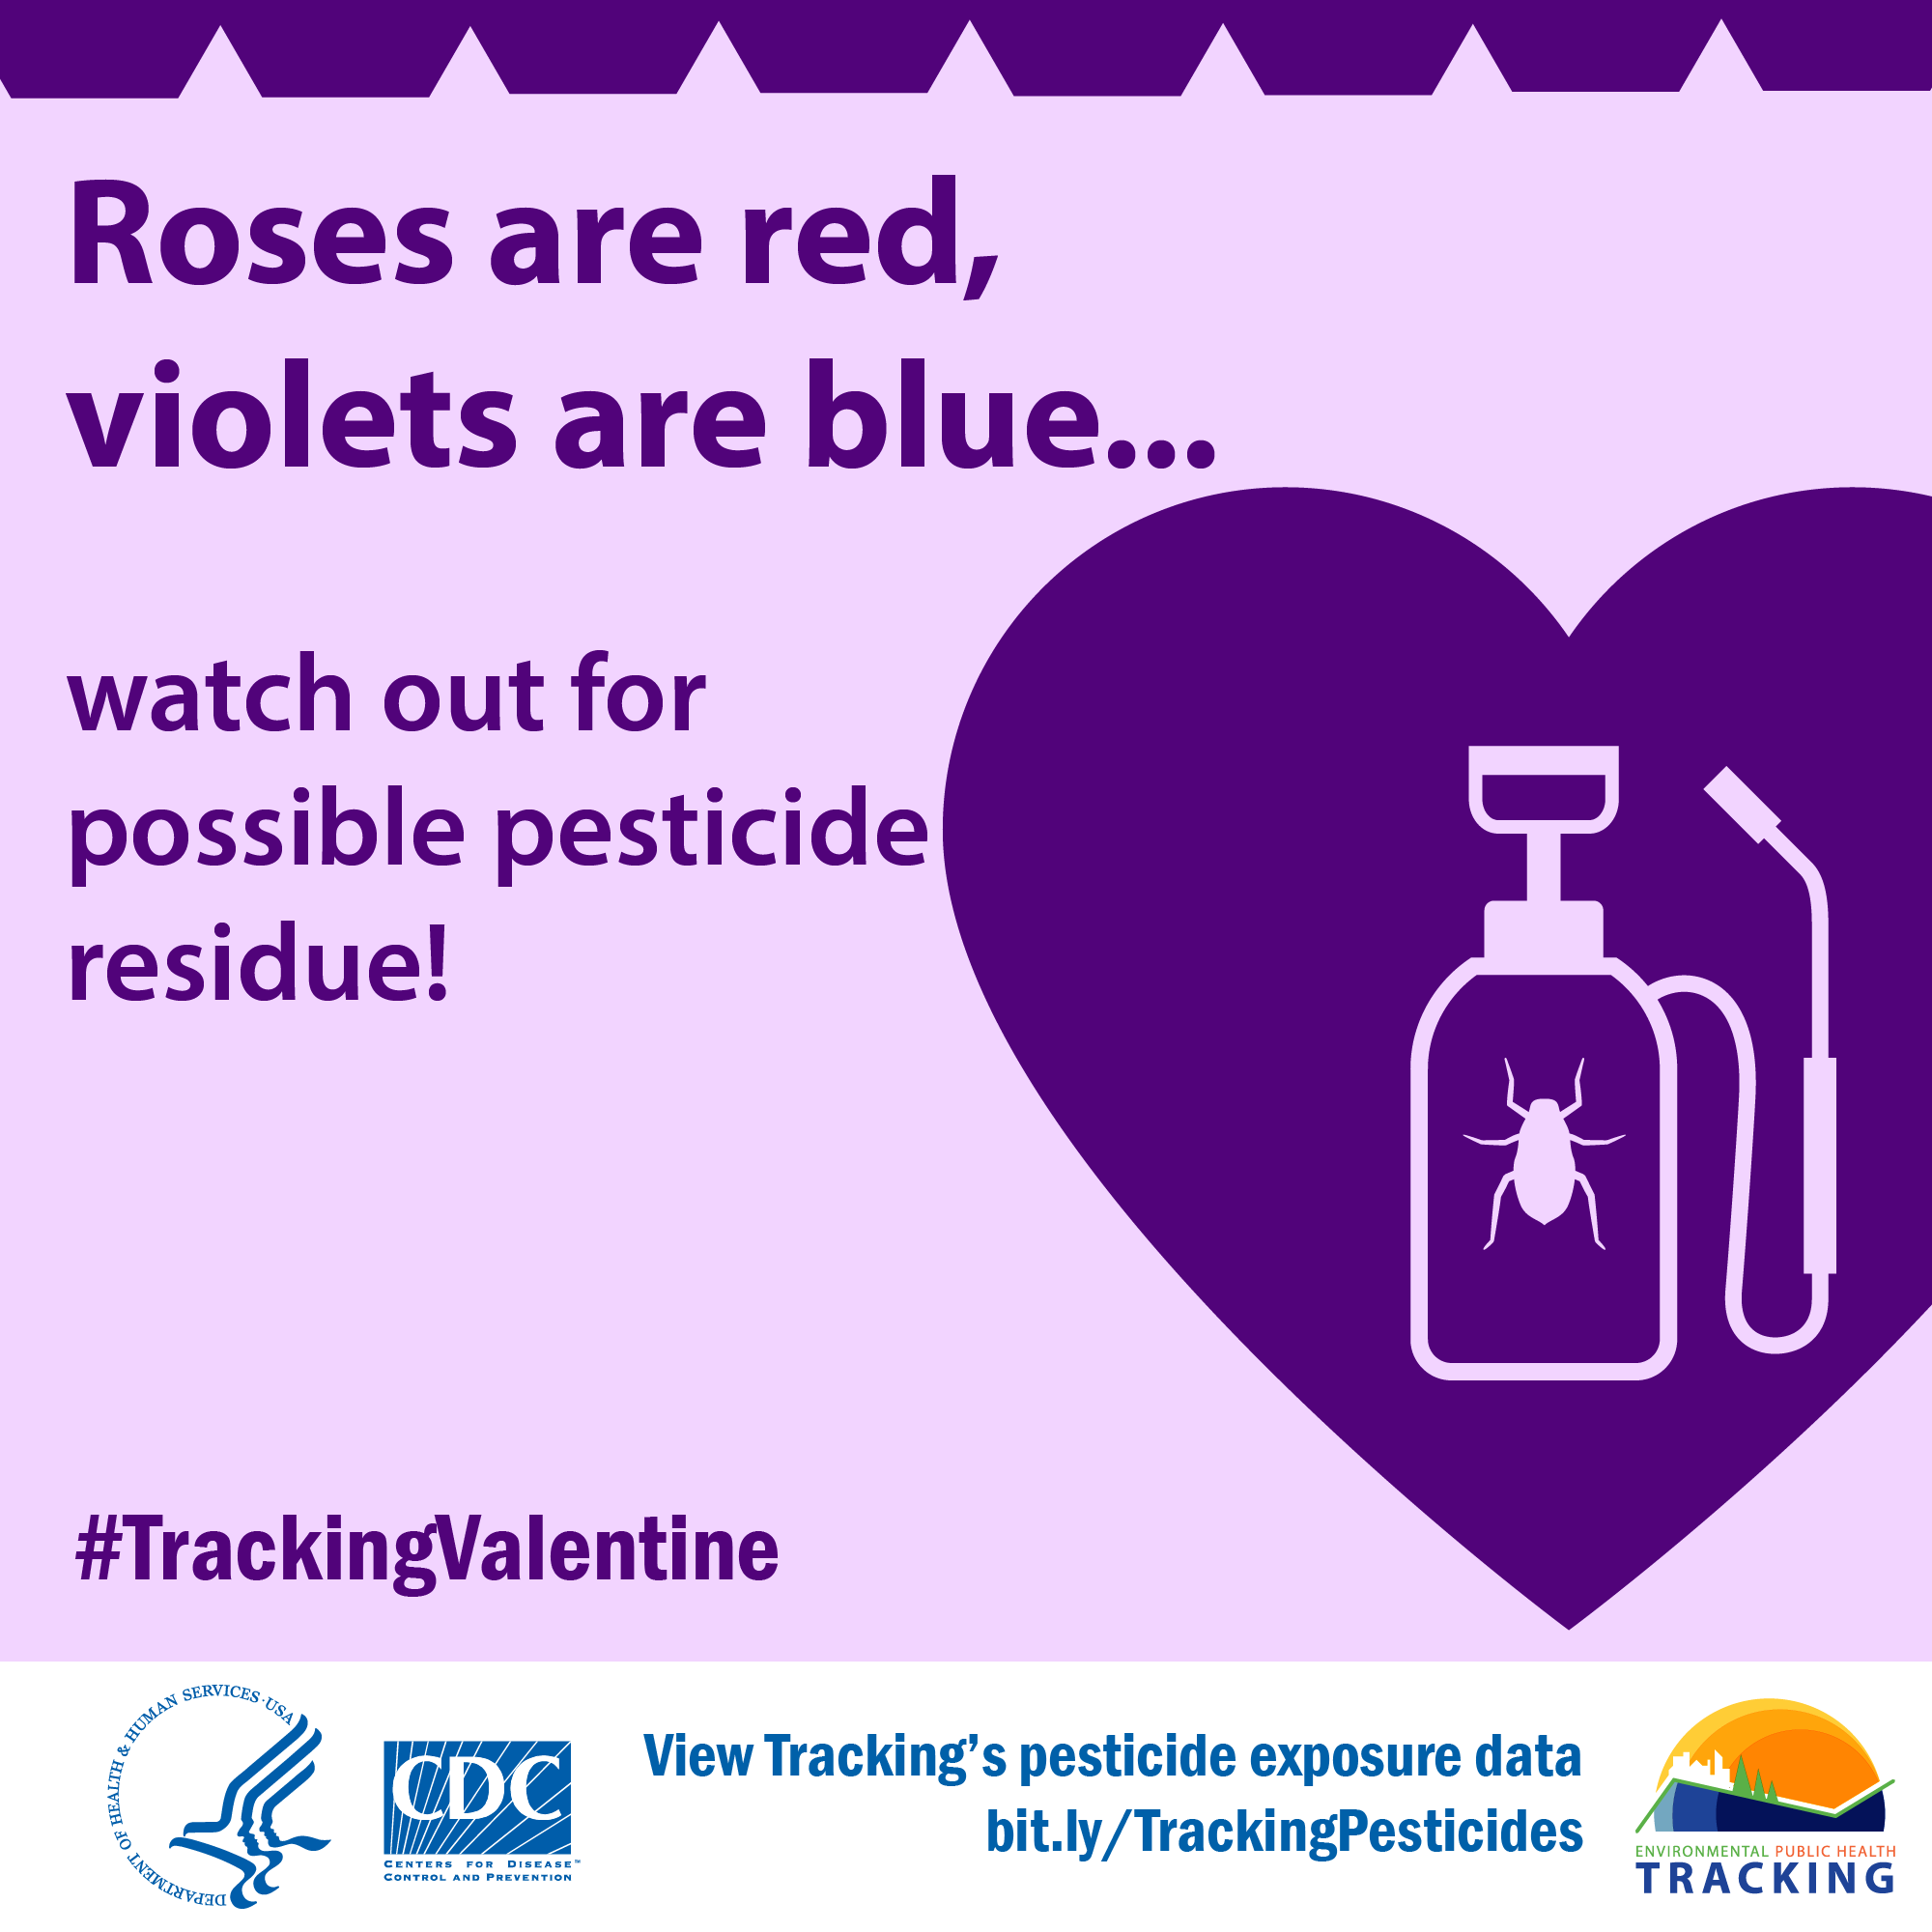 pesticide sprayer icon inside decorative violet heart with text: "Roses are red, violets are blue...watch out for possible pesticide residue!"